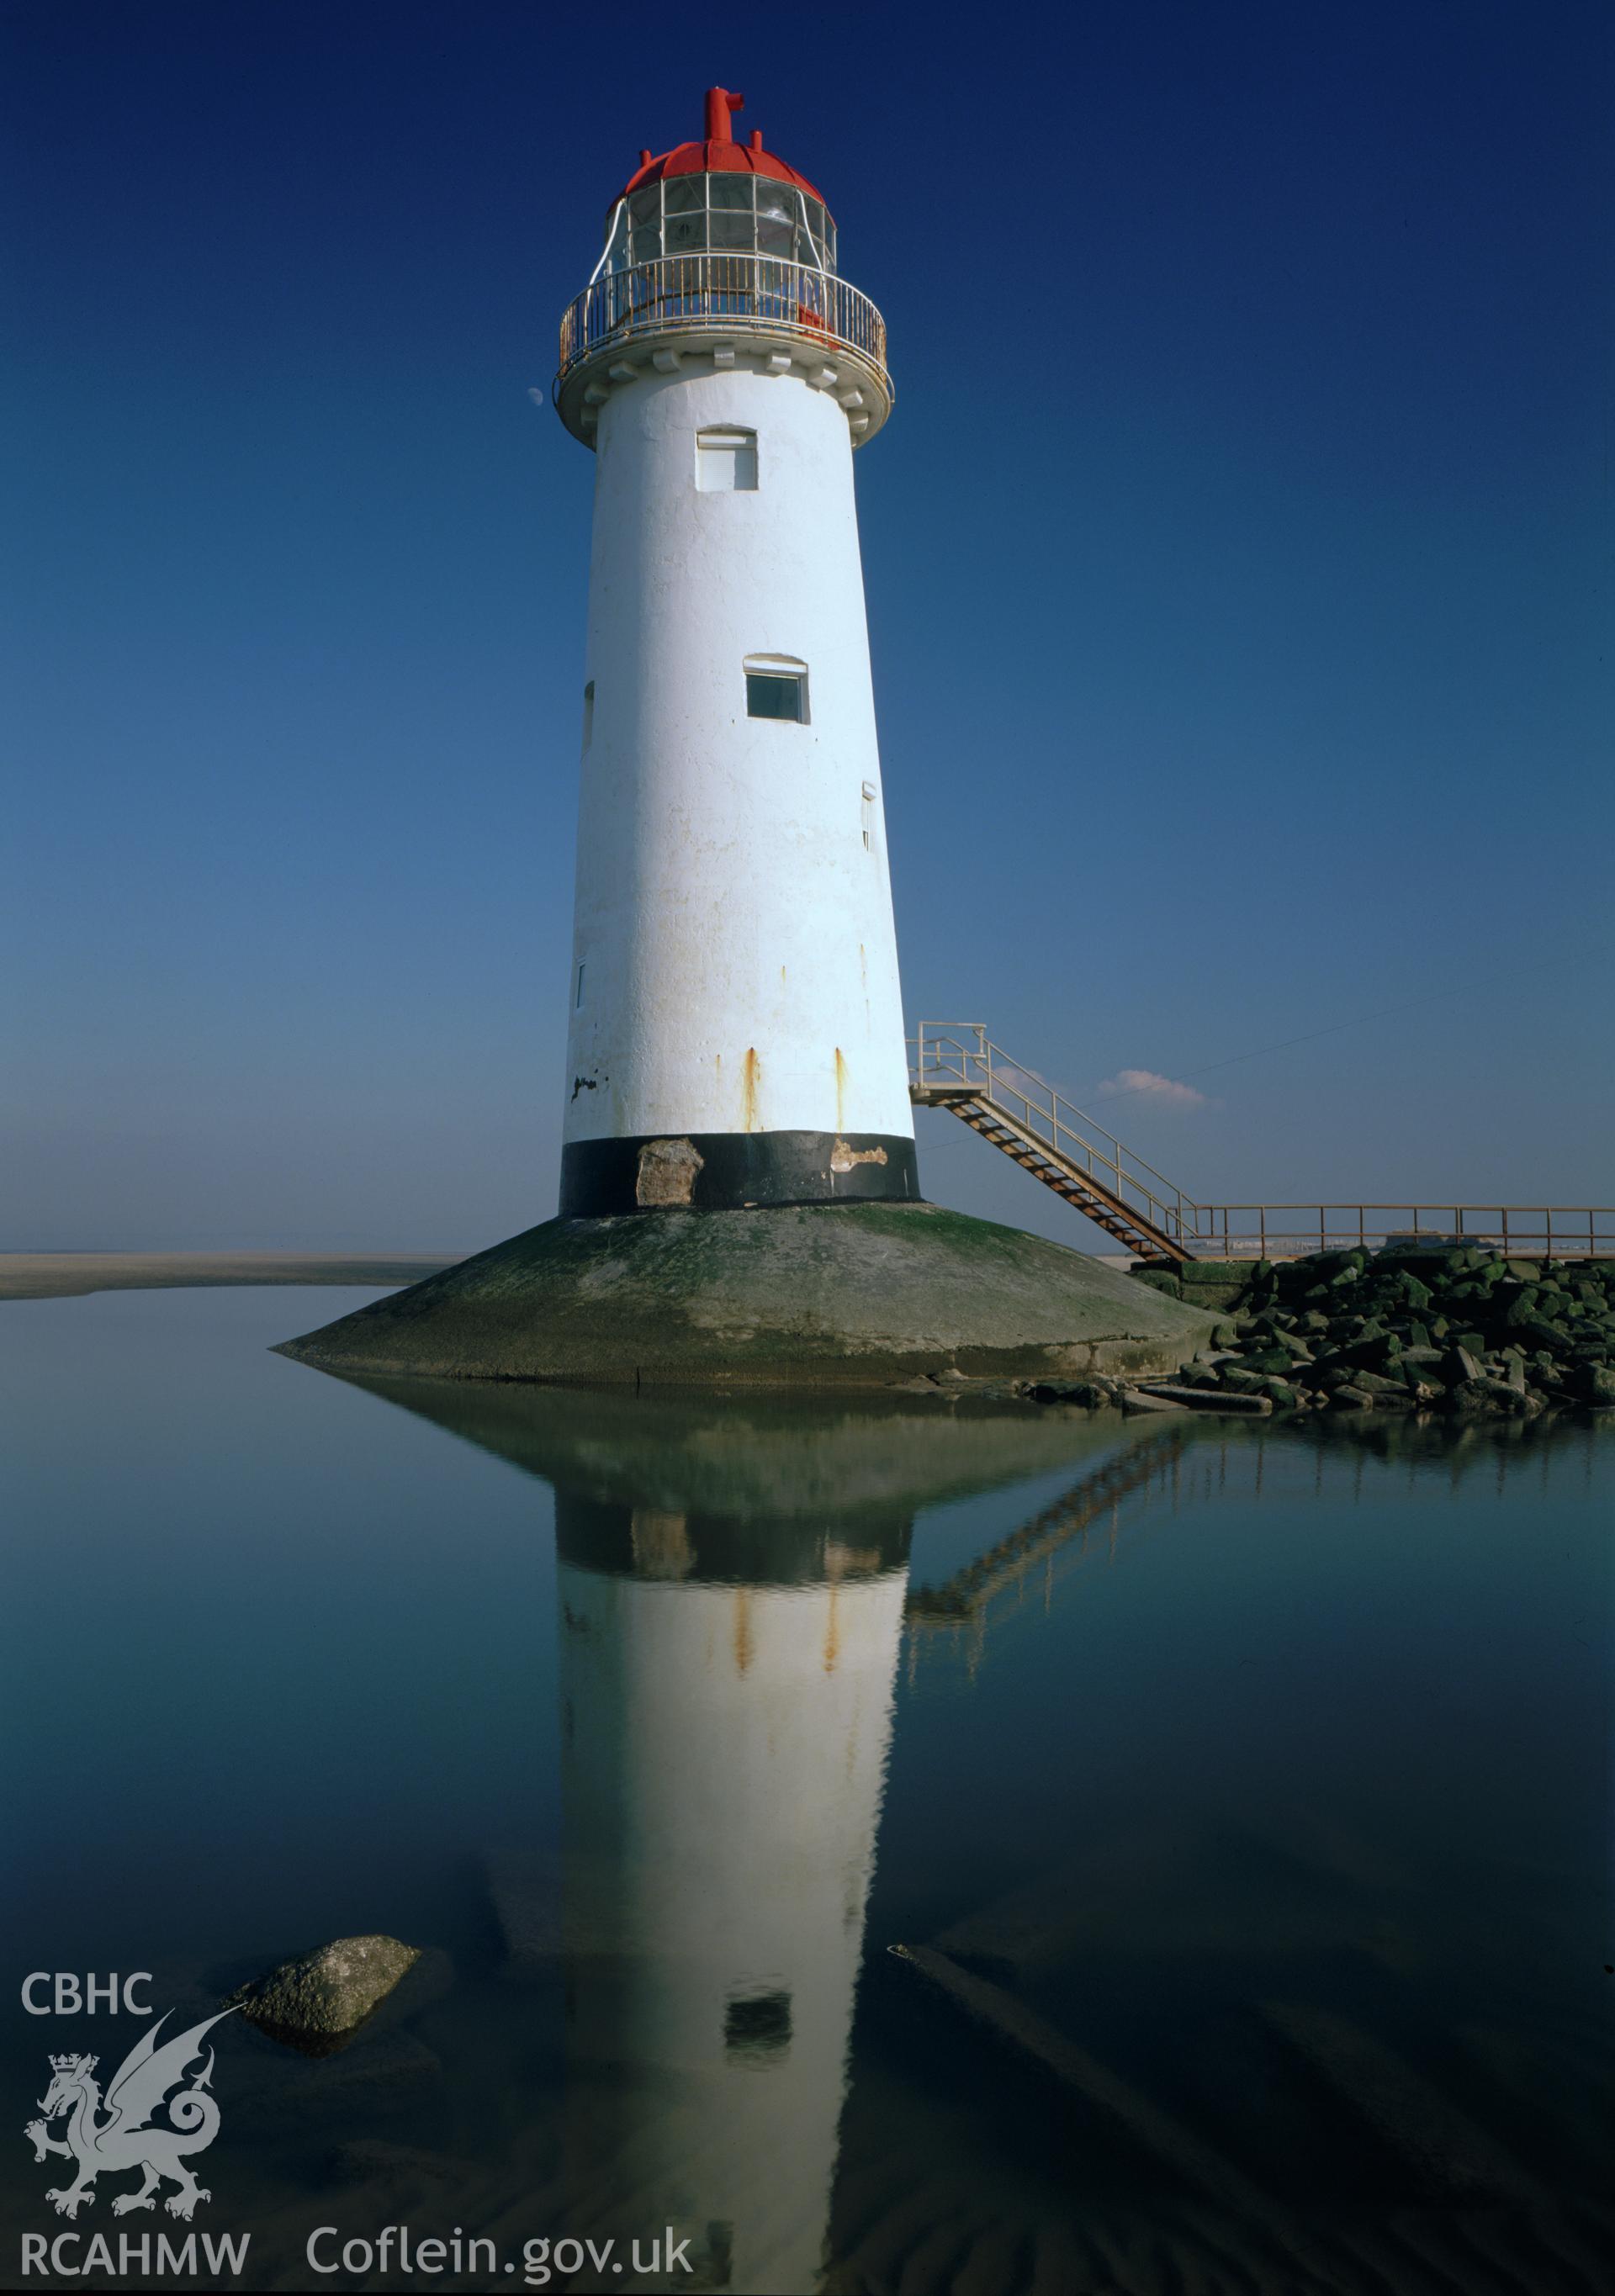 Digital copy of a colour negative showing a view of Point of Ayr Lighthouse.